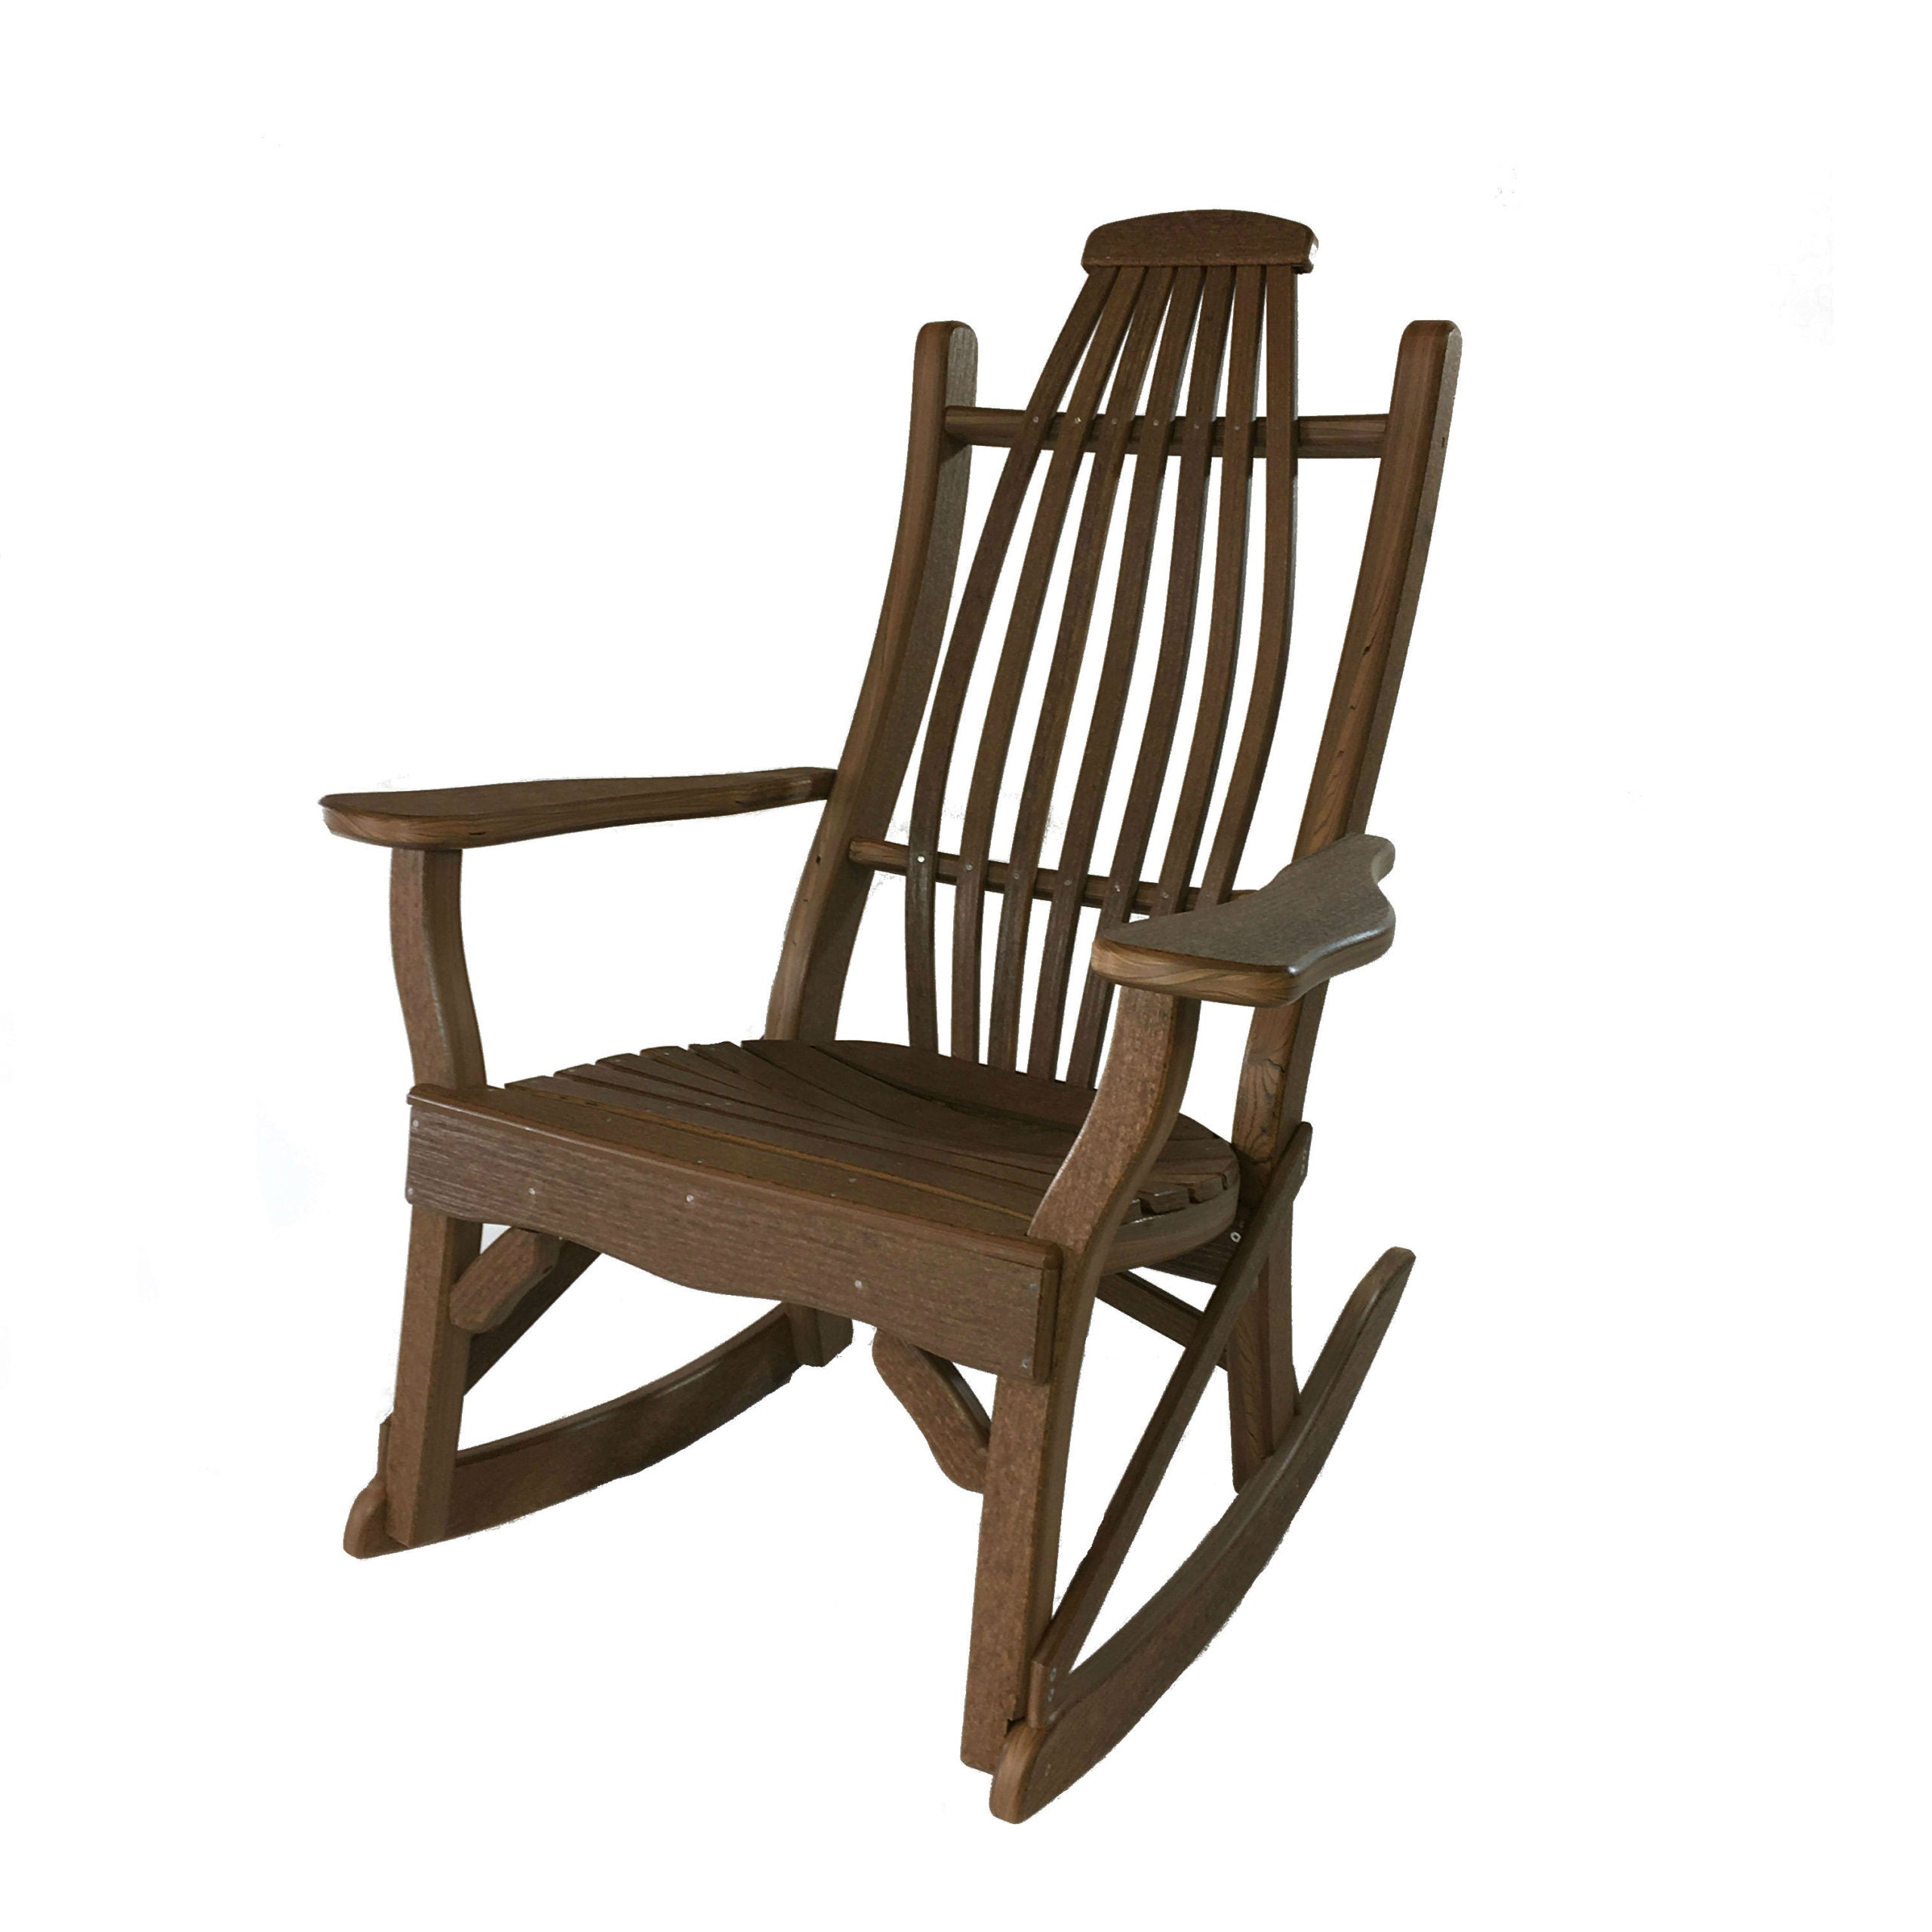 Bentwood Rustic Rocking Chair